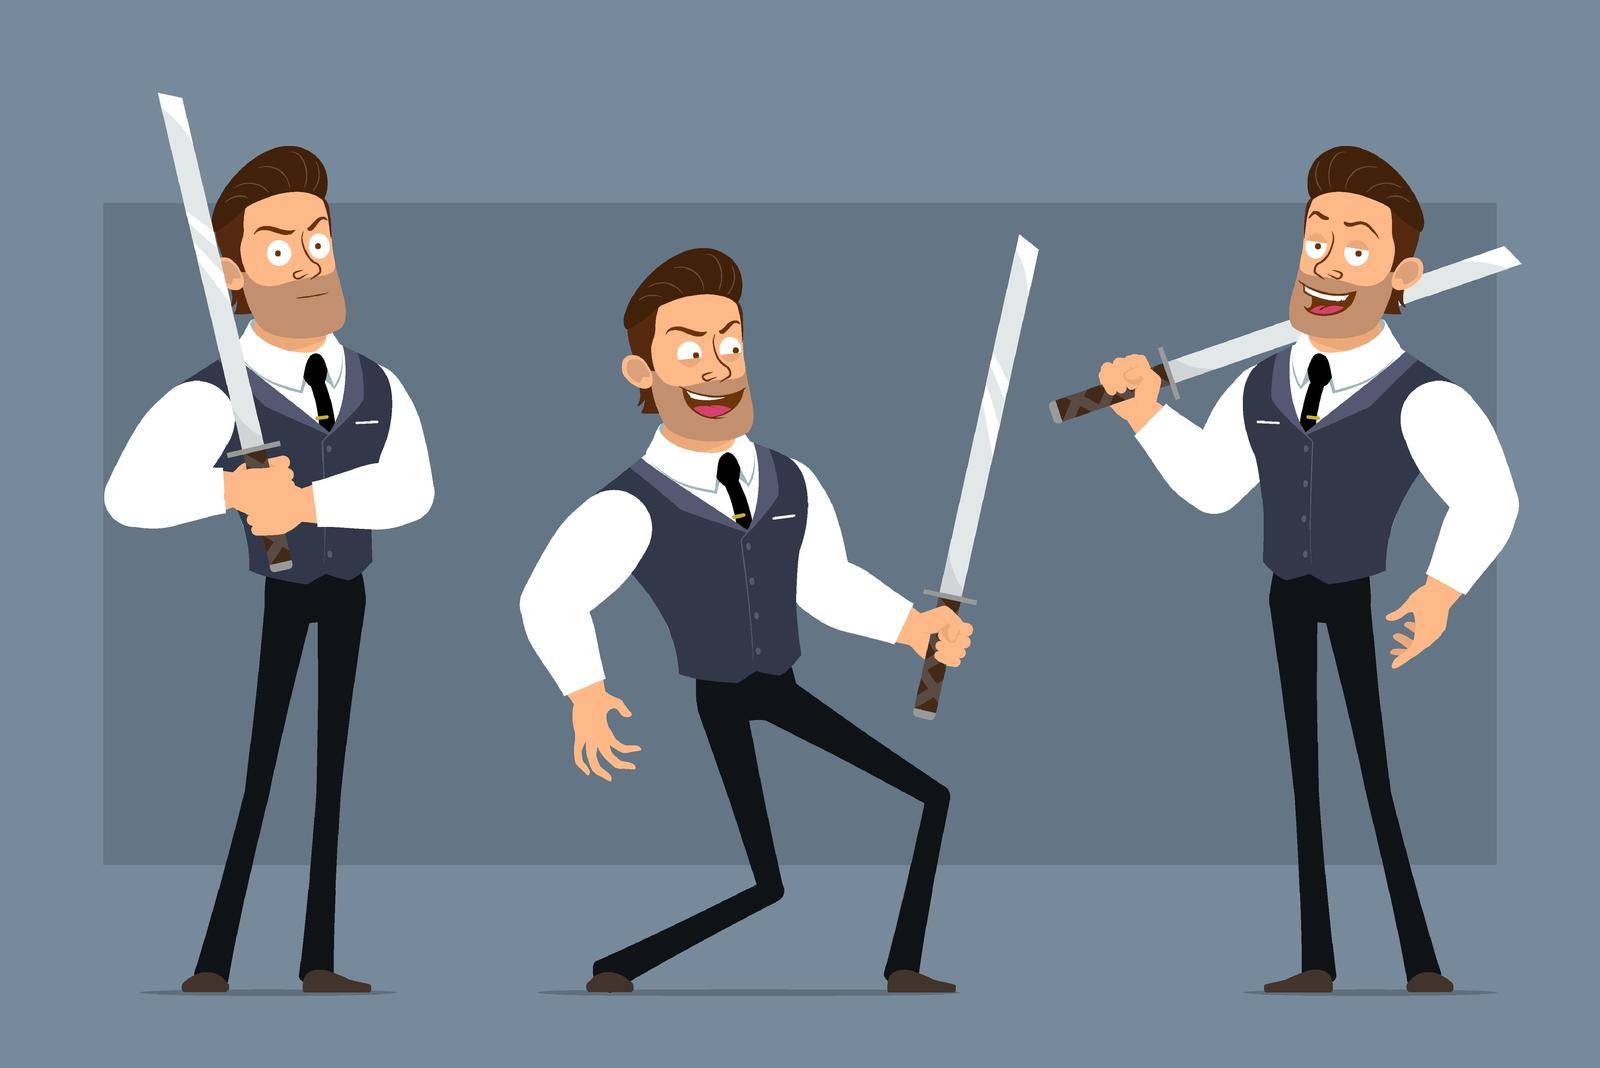 Cartoon flat funny cute strong muscular businessman character with black tie. Ready for animations. Smiling boy fighting with katana sword. Isolated on gray background. Big vector icon set.